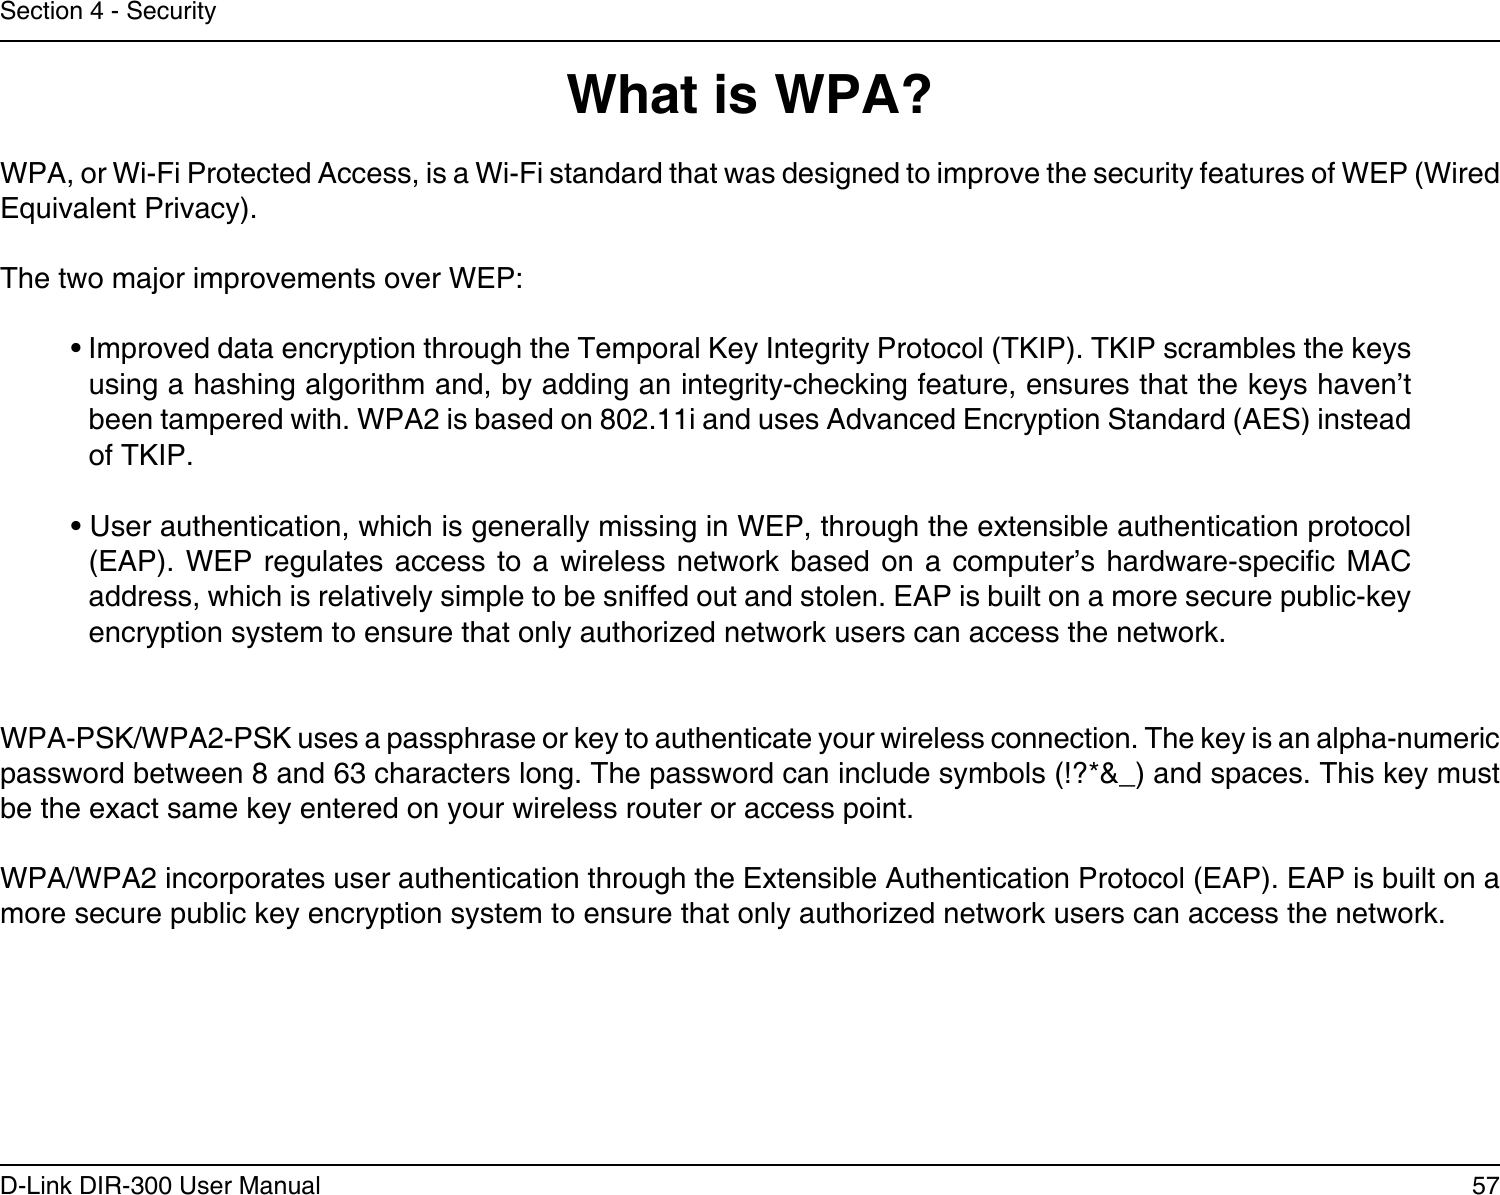 57D-Link DIR-300 User ManualSection 4 - SecurityWhat is WPA?WPA, or Wi-Fi Protected Access, is a Wi-Fi standard that was designed to improve the security features of WEP (Wired Equivalent Privacy).  The two major improvements over WEP: • Improved data encryption through the Temporal Key Integrity Protocol (TKIP). TKIP scrambles the keys using a hashing algorithm and, by adding an integrity-checking feature, ensures that the keys haven’t been tampered with. WPA2 is based on 802.11i and uses Advanced Encryption Standard (AES) instead of TKIP.• User authentication, which is generally missing in WEP, through the extensible authentication protocol (EAP). WEP regulates  access to  a wireless network  based on a  computer’s hardware-specic MAC address, which is relatively simple to be sniffed out and stolen. EAP is built on a more secure public-key encryption system to ensure that only authorized network users can access the network.WPA-PSK/WPA2-PSK uses a passphrase or key to authenticate your wireless connection. The key is an alpha-numeric password between 8 and 63 characters long. The password can include symbols (!?*&amp;_) and spaces. This key must be the exact same key entered on your wireless router or access point.WPA/WPA2 incorporates user authentication through the Extensible Authentication Protocol (EAP). EAP is built on a more secure public key encryption system to ensure that only authorized network users can access the network.